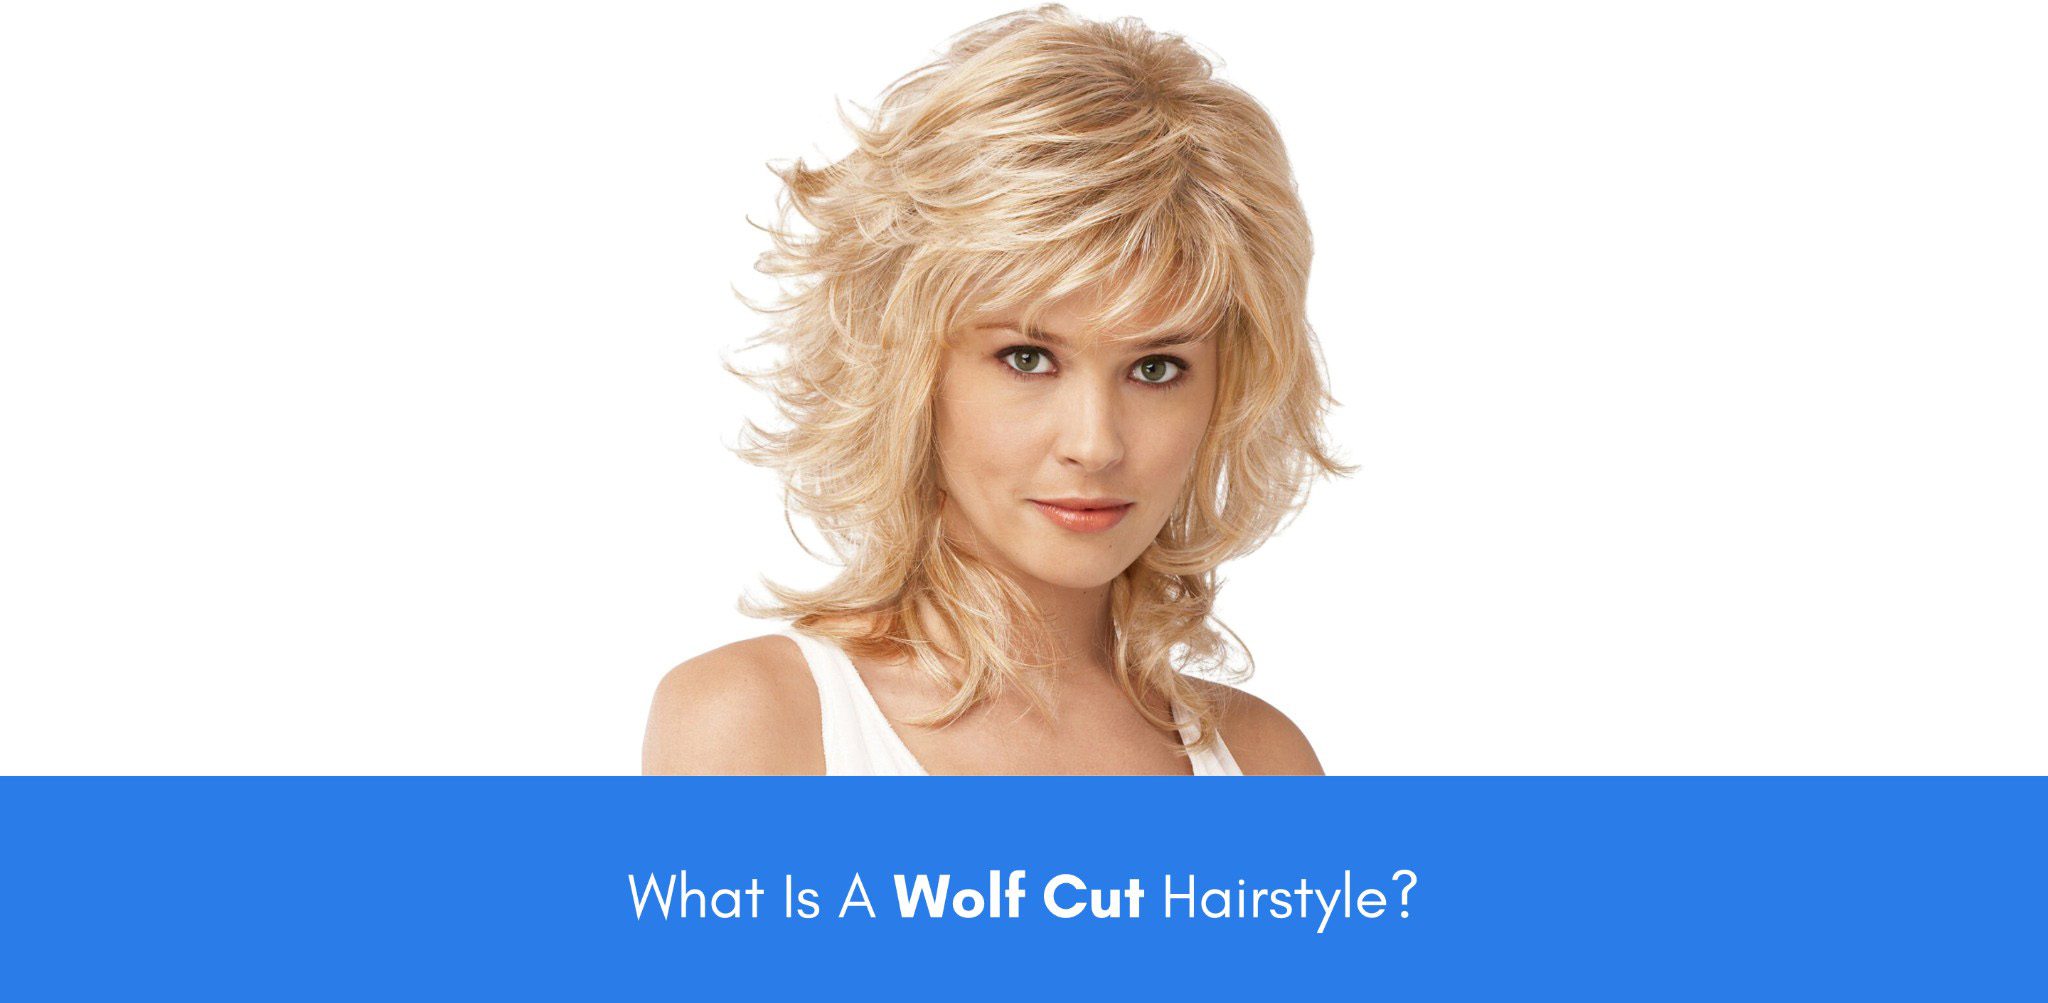 What Is A Wolf Cut Hairstyle?